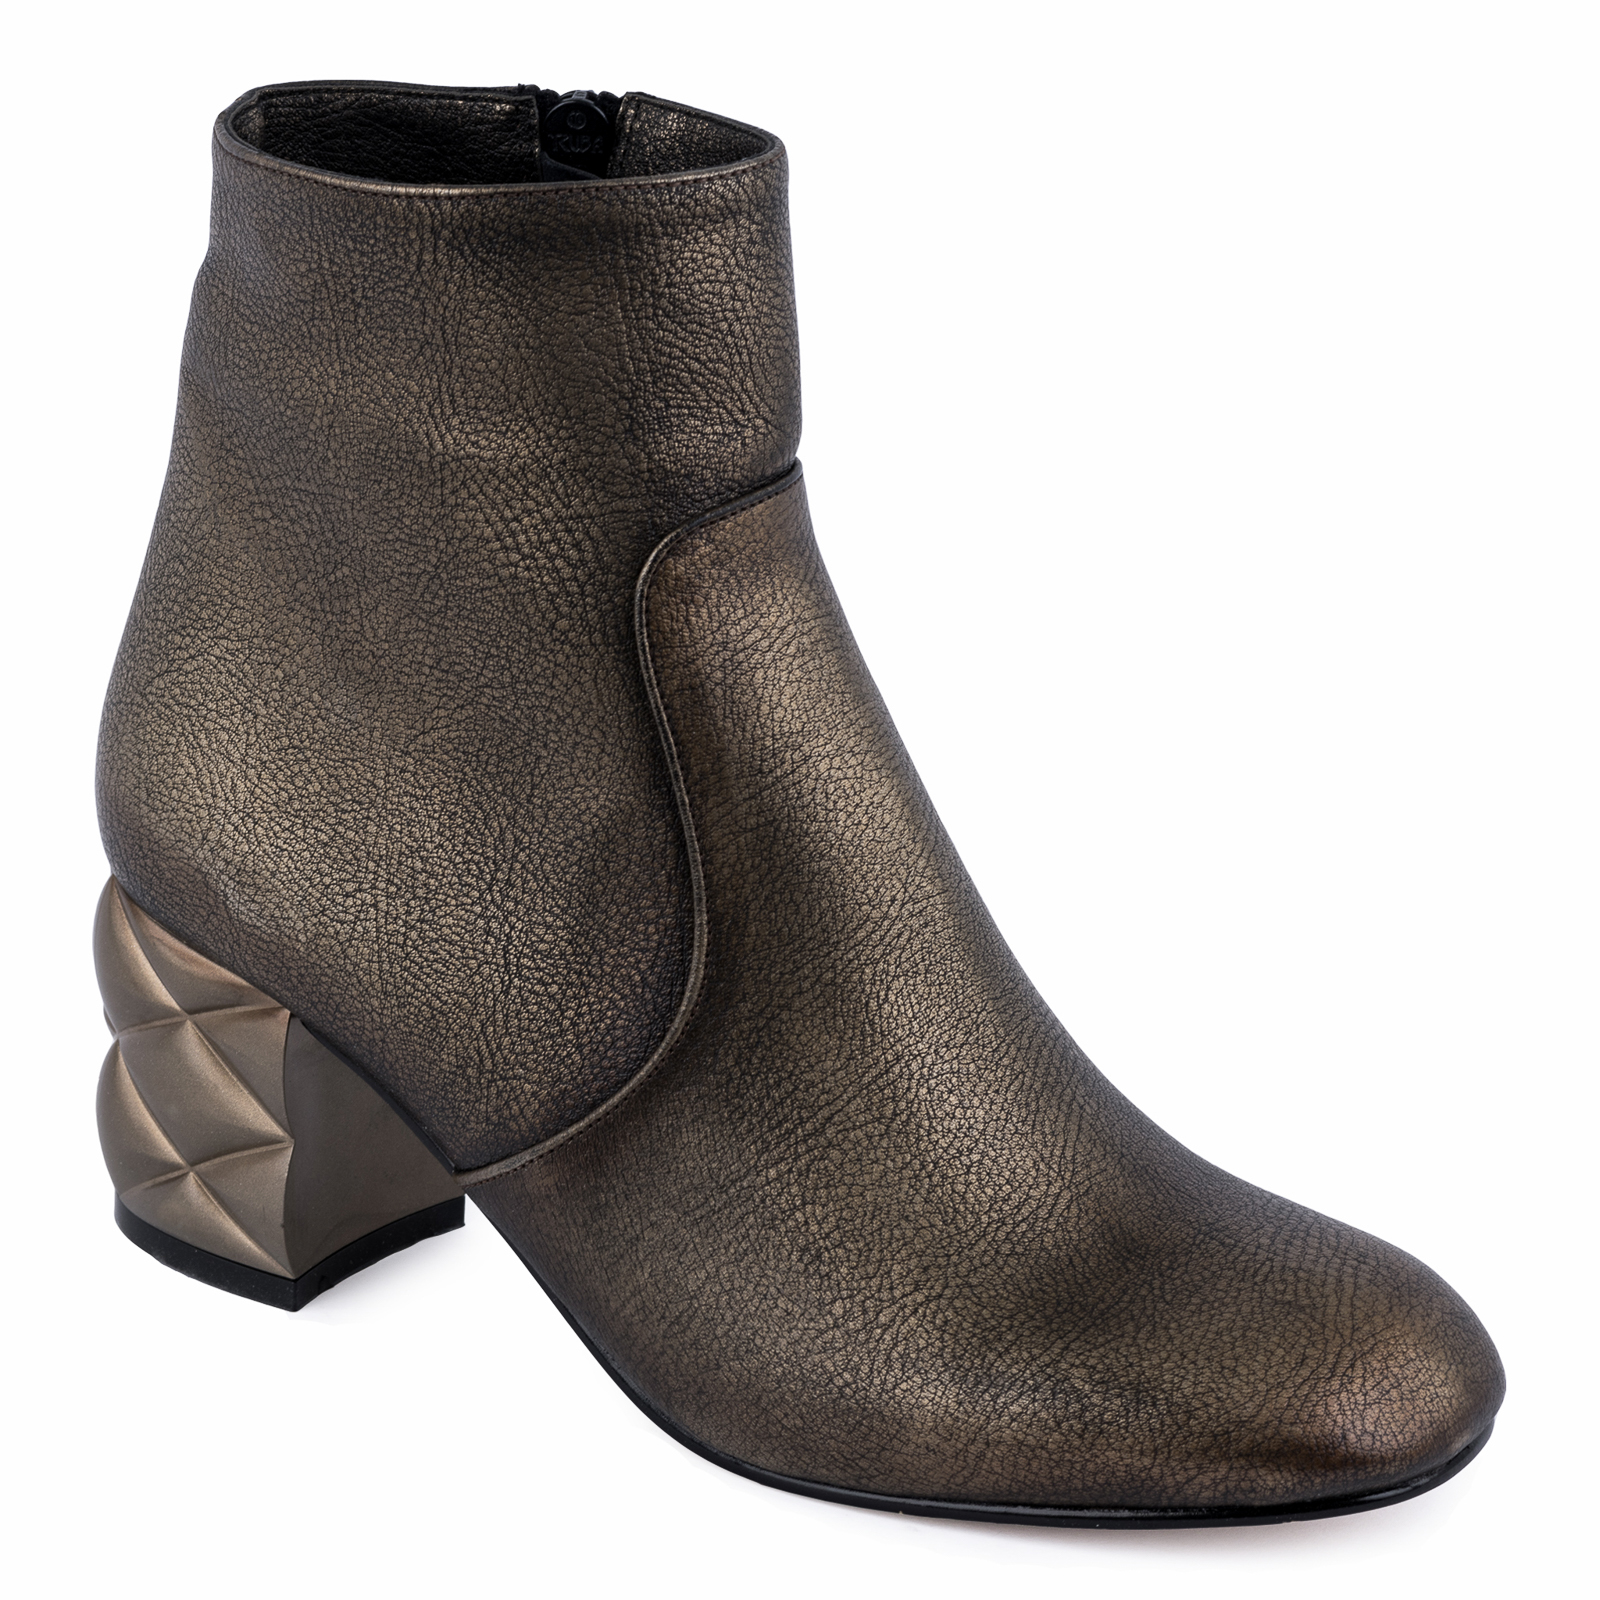 ANKLE BOOTS WITH ZIPPER AND BLOCK HEEL - BRONZE